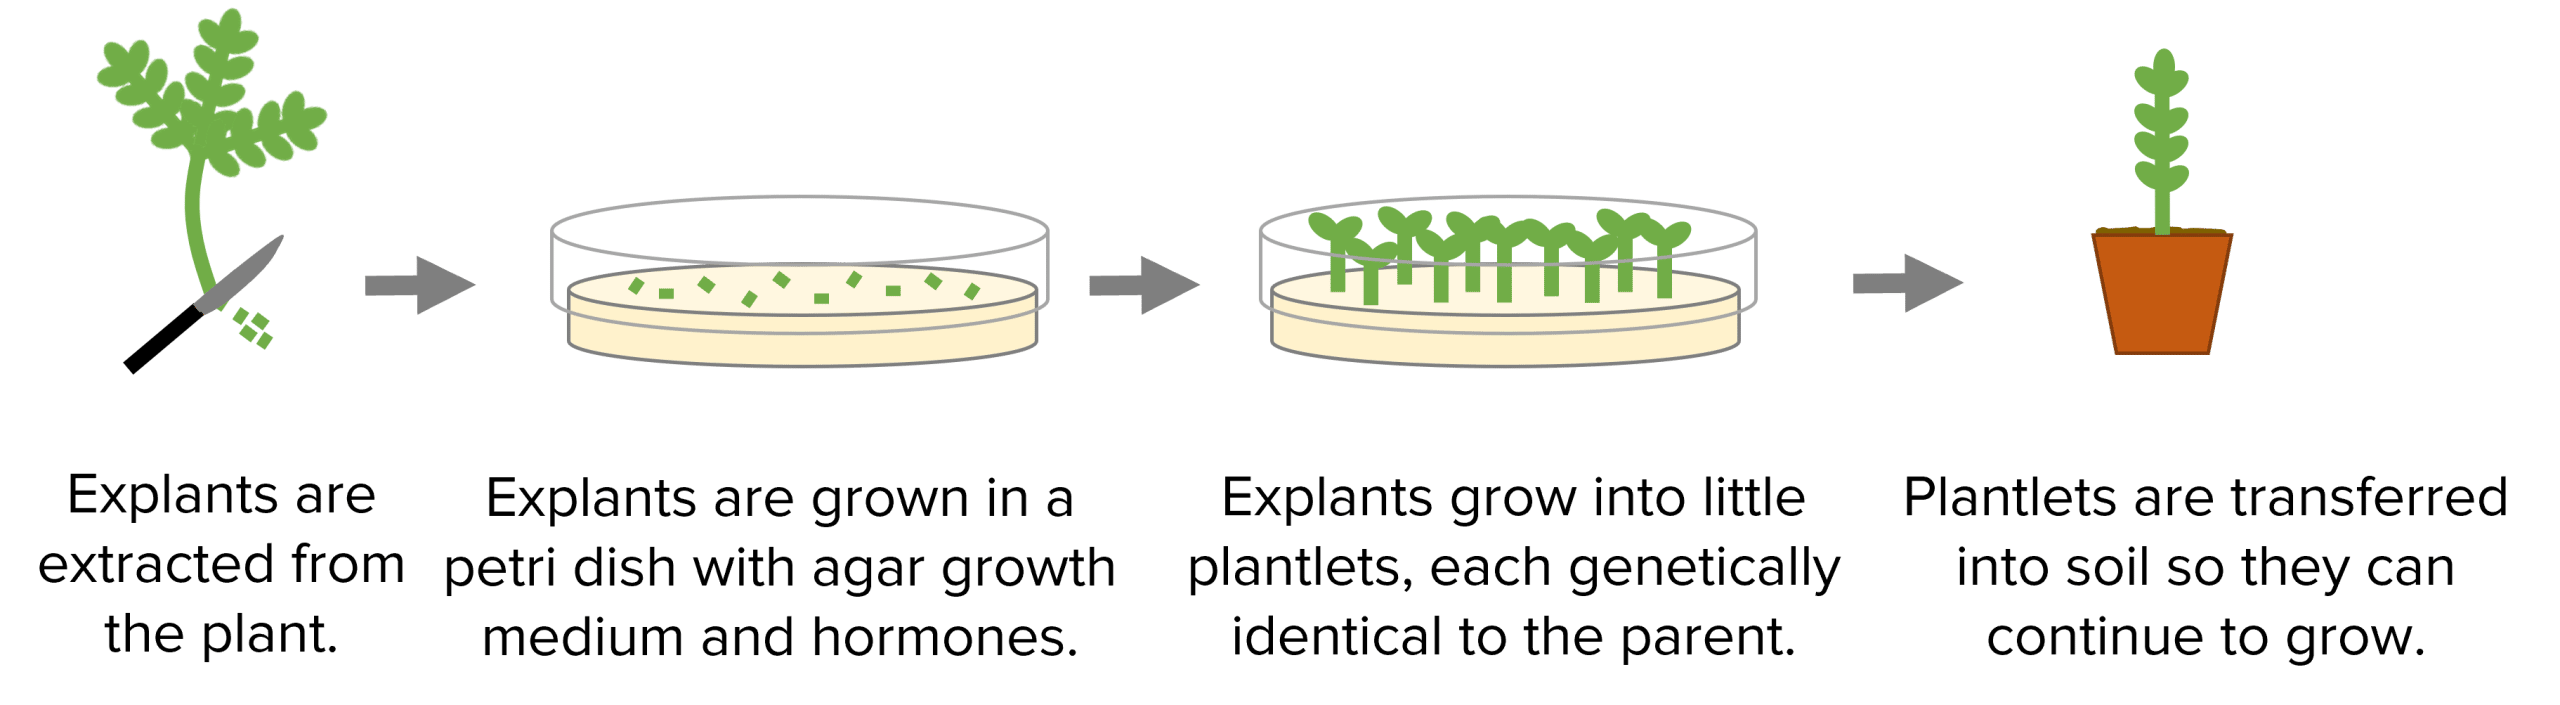 cloning process in plants